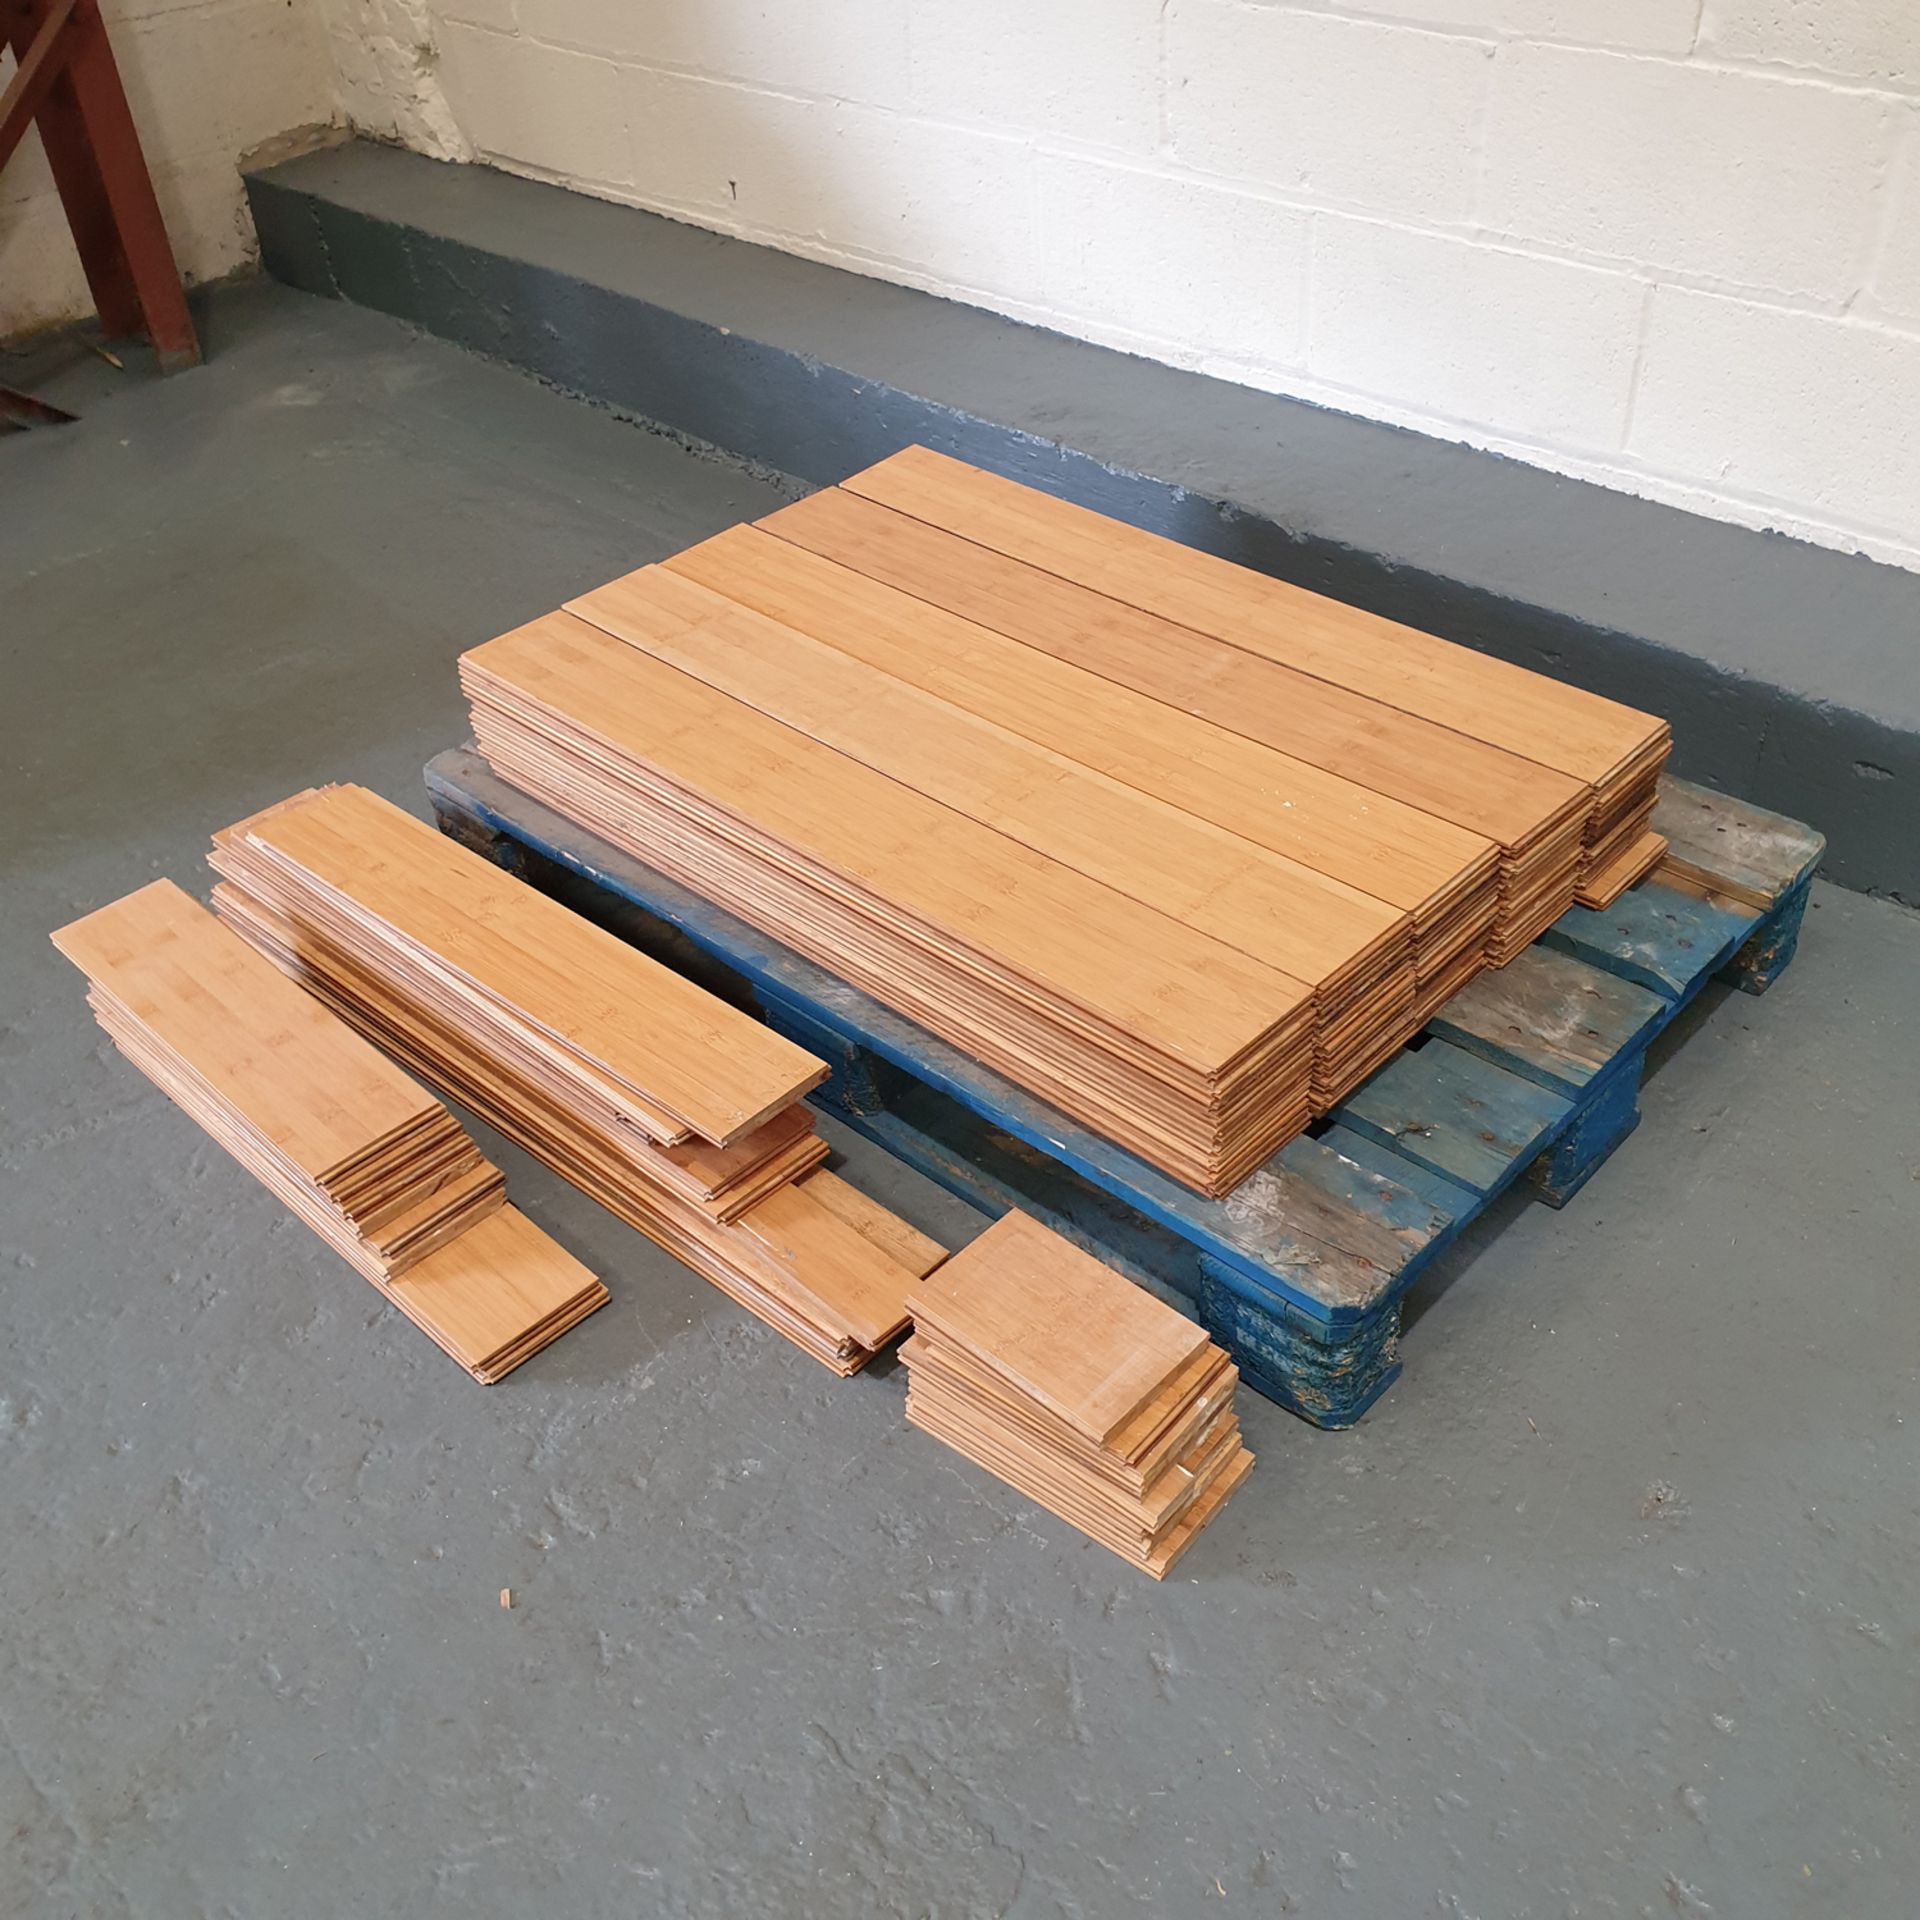 Hard Wood Flooring (Ply) With Additional Off Cuts. Approx 5 Square Meters. - Image 2 of 5